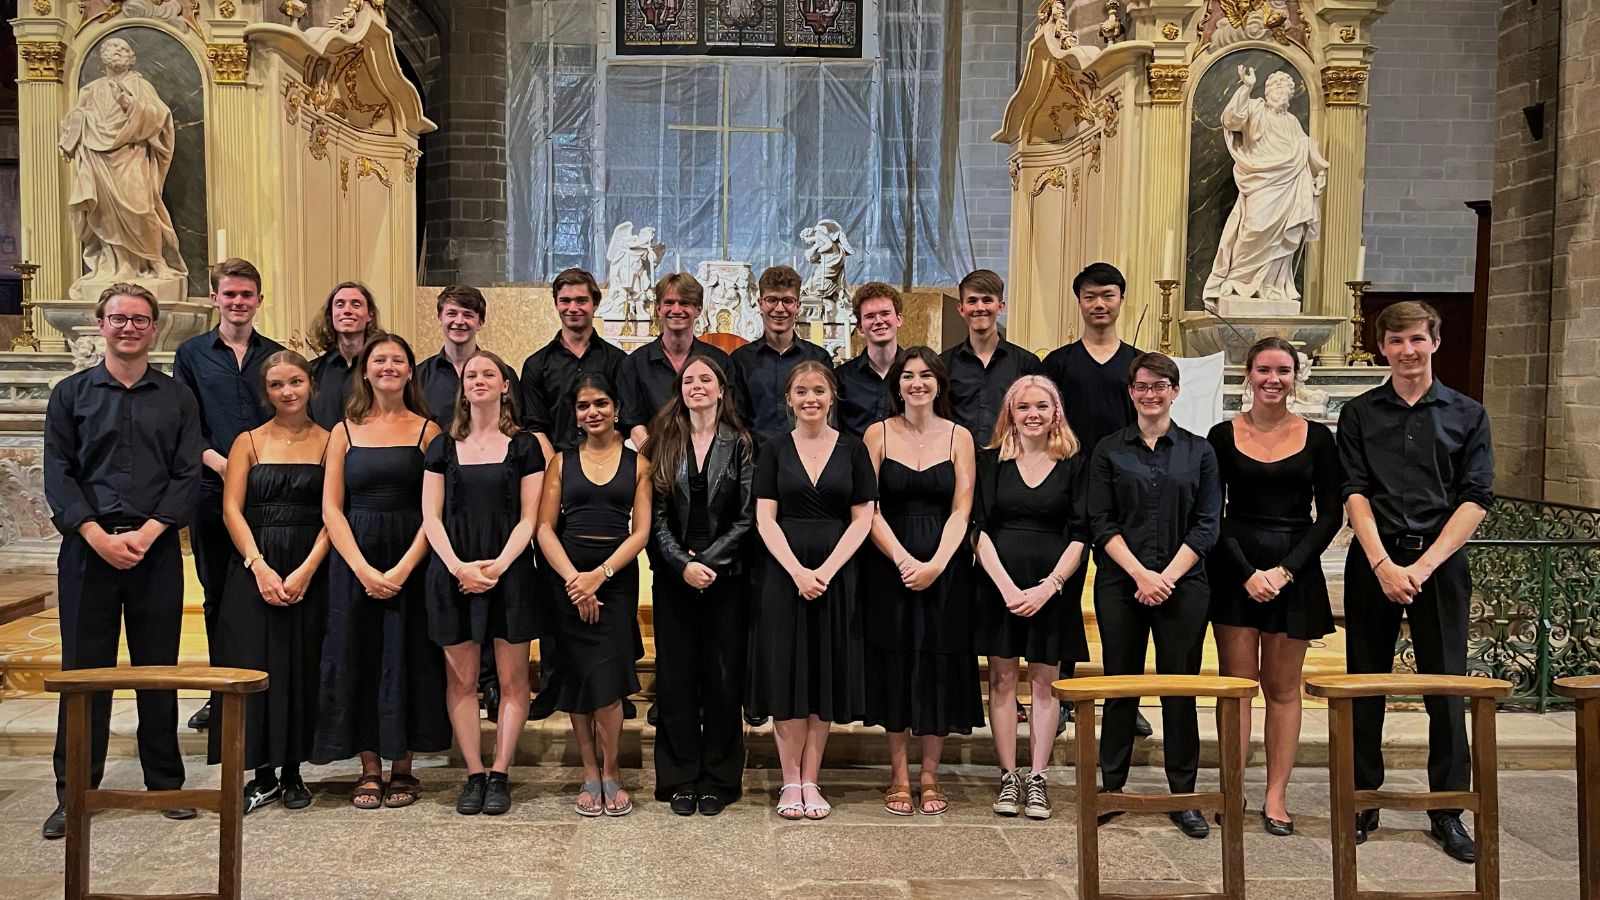 A photo of the LMH Choir performing in a church in France